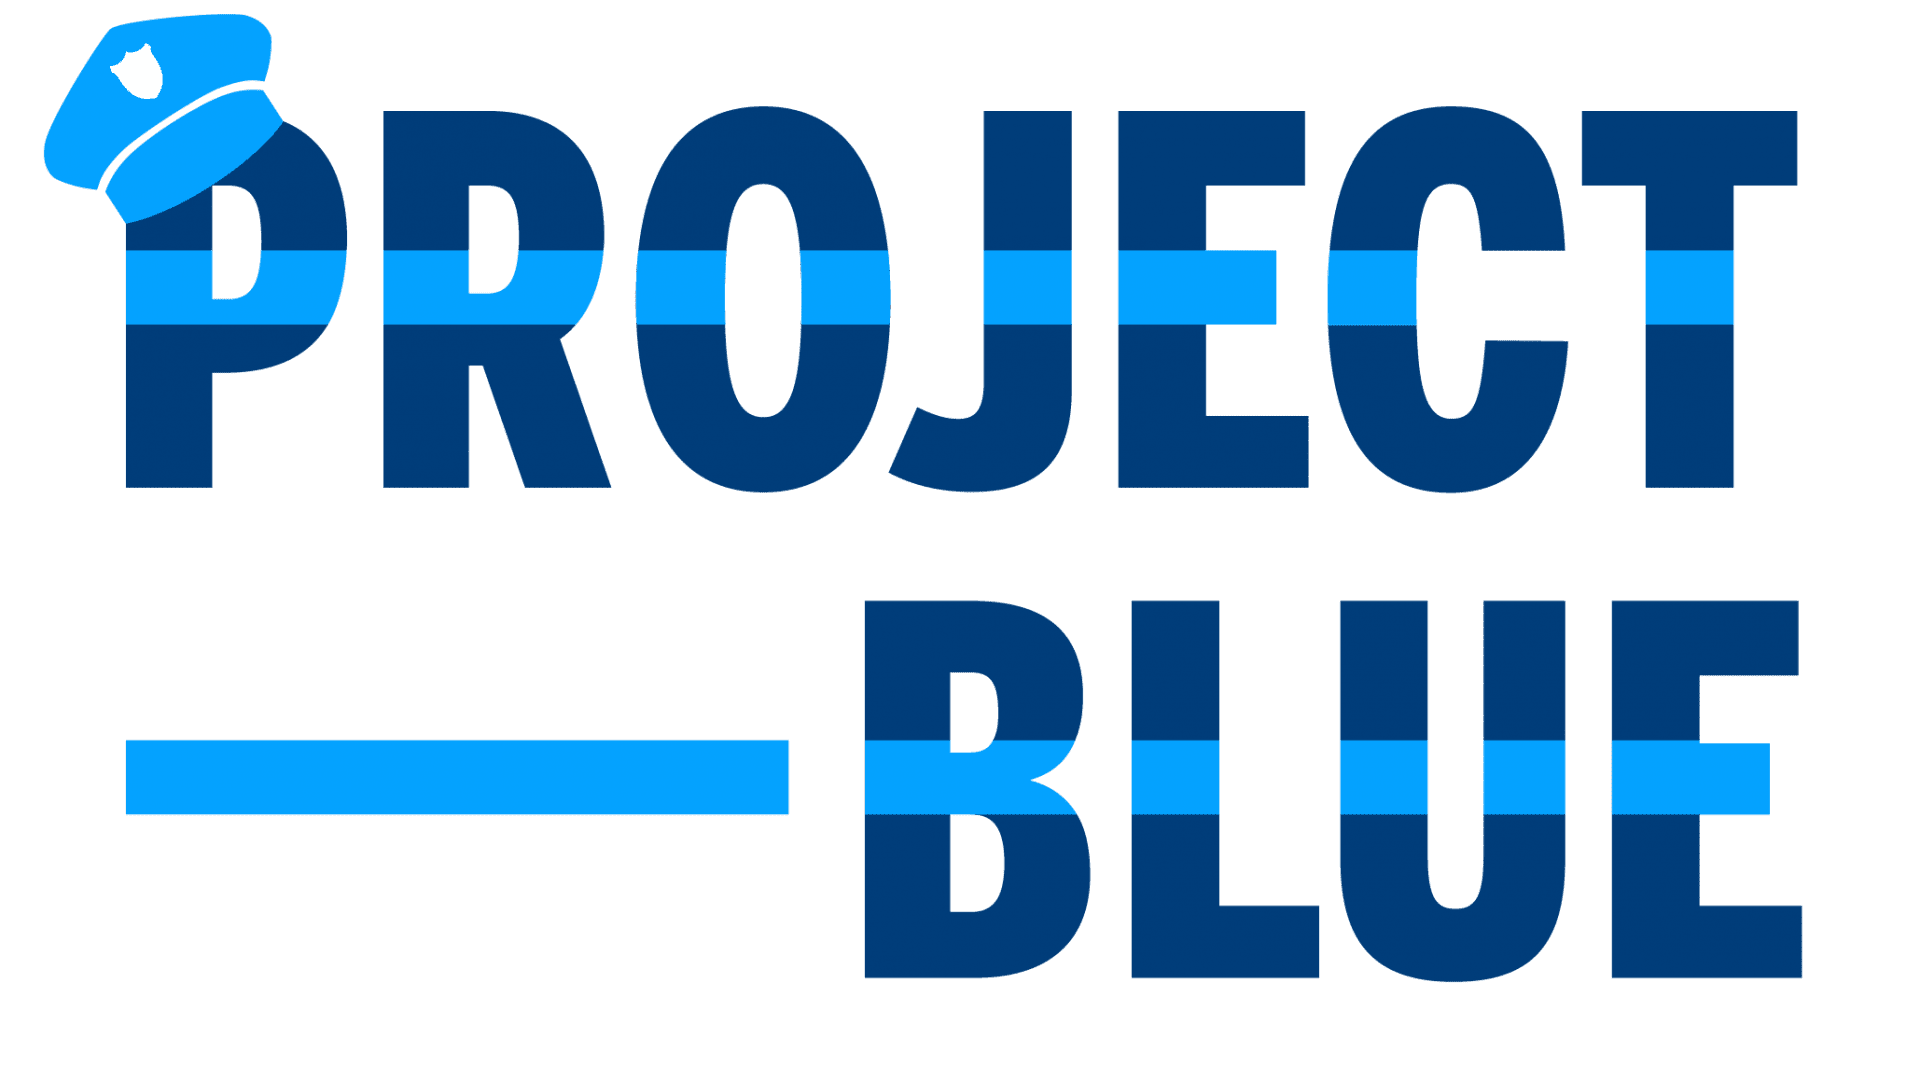 A blue and black logo for project blue